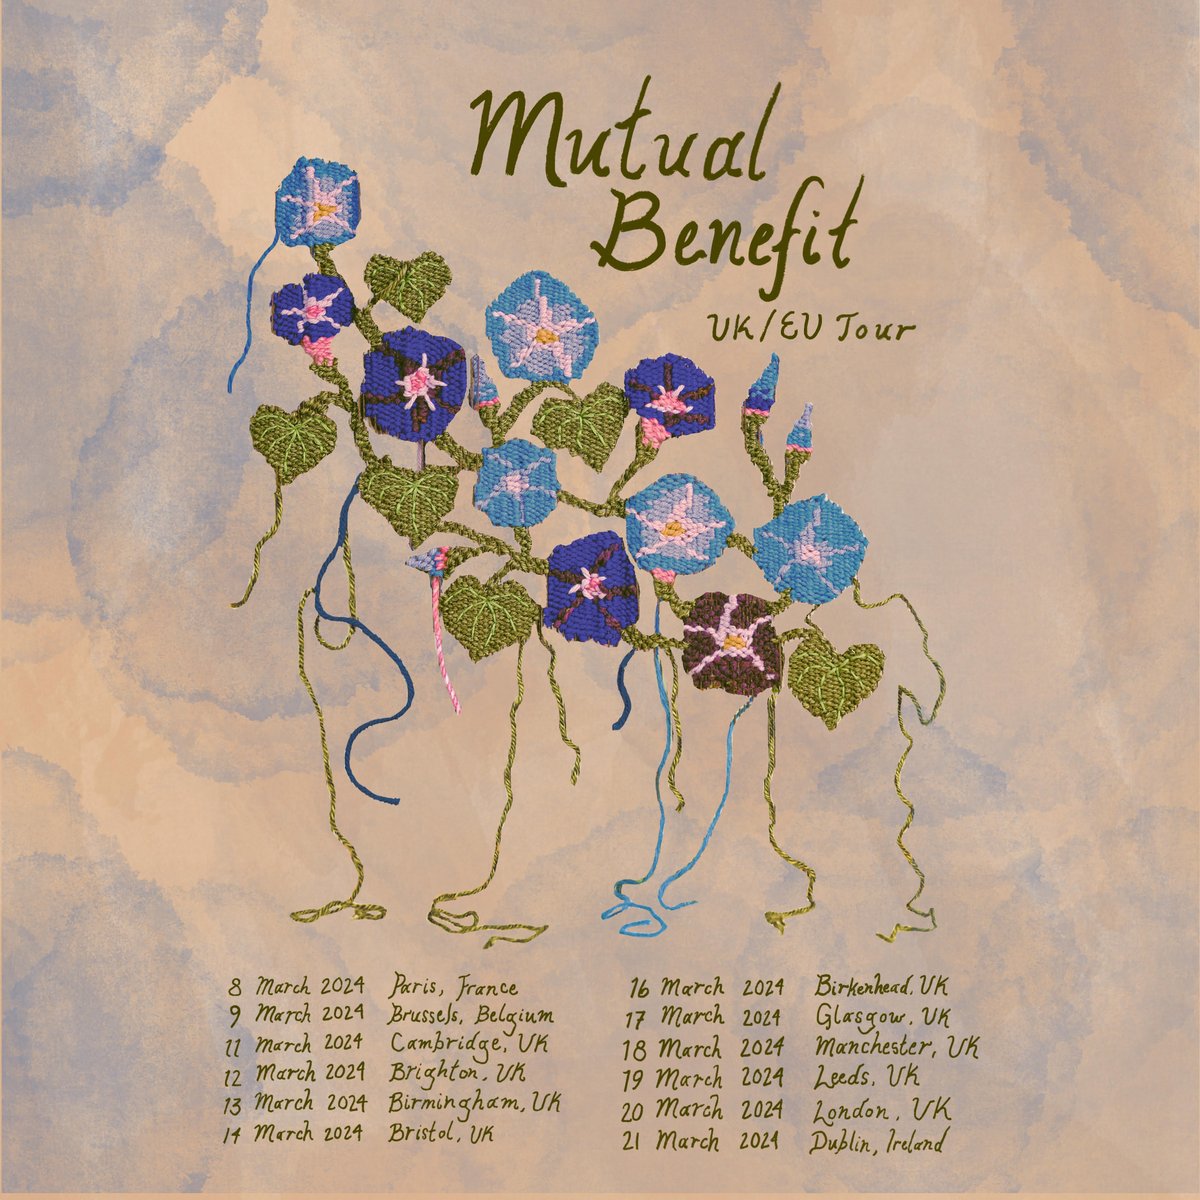 Following the release of @mutual_benefit's critically acclaimed and stunning album, ‘Growing at the Edges’ earlier this year, he is coming to the UK and EU next March for a string of tour dates! 🌱 Tickets on sale now 🎟️ mutualbenefit.ffm.to/ukeutour